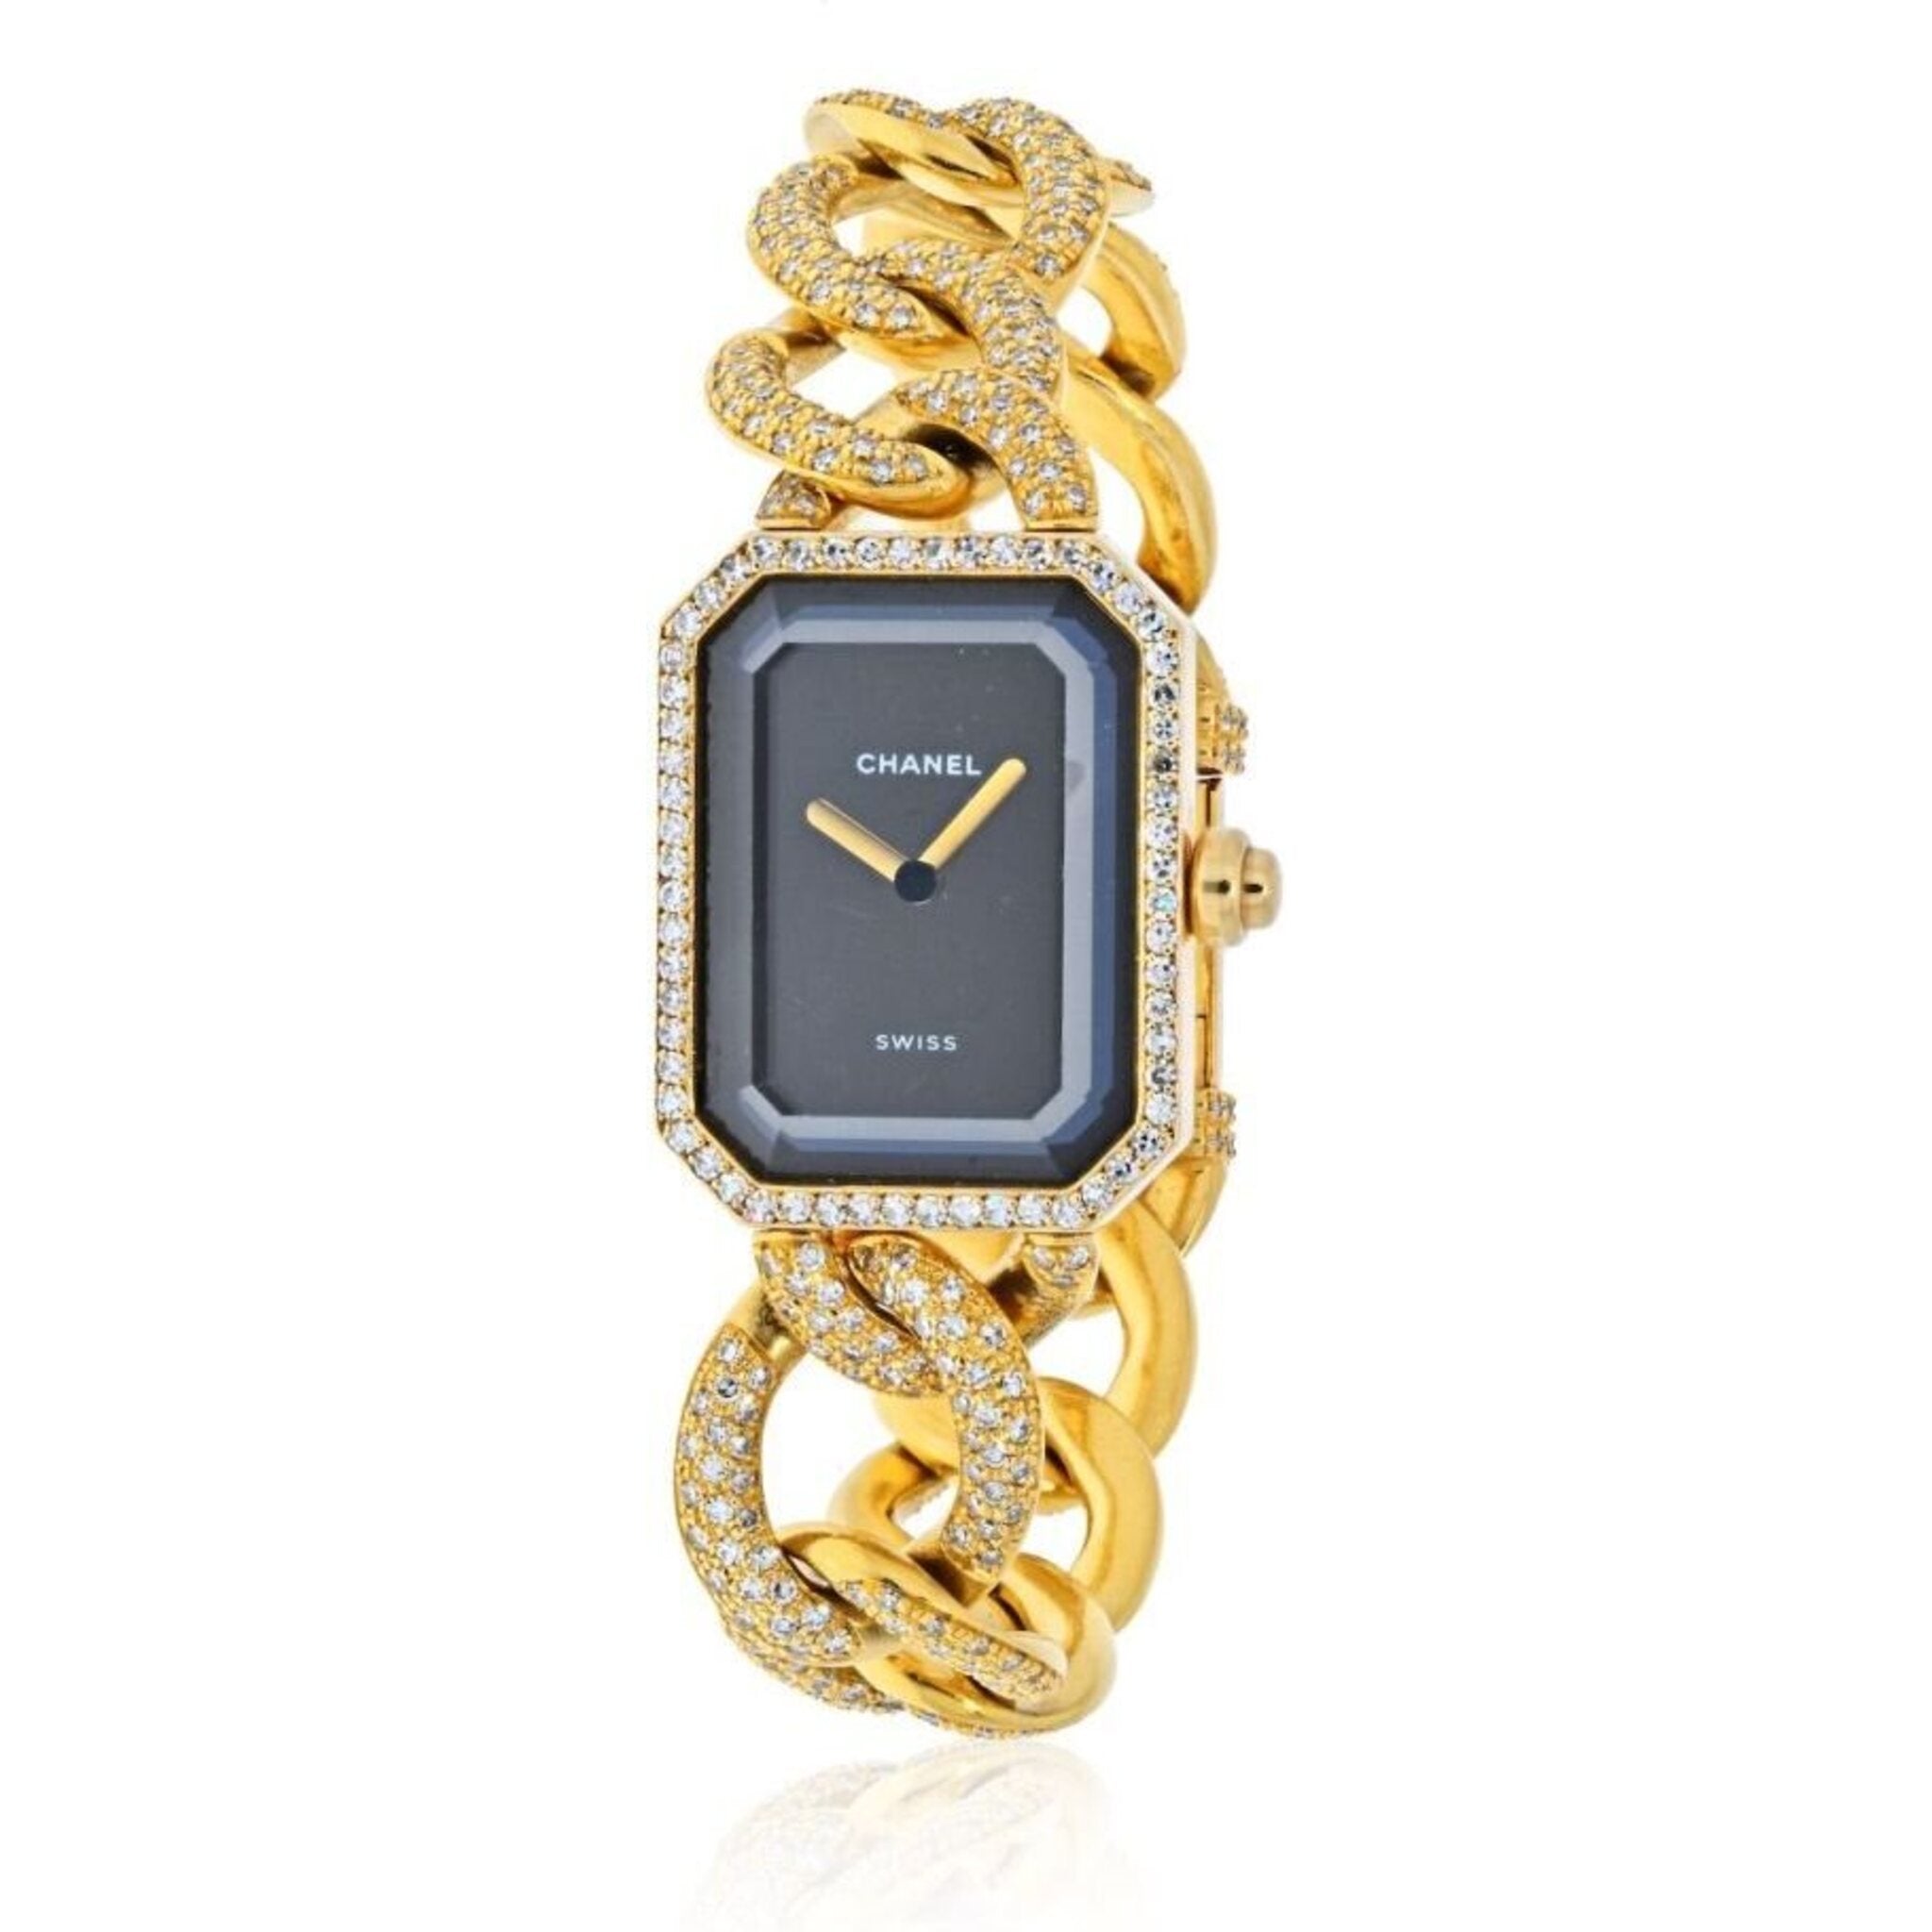 Chanel Première Mini Watch – H2132 – 7,920 USD – The Watch Pages